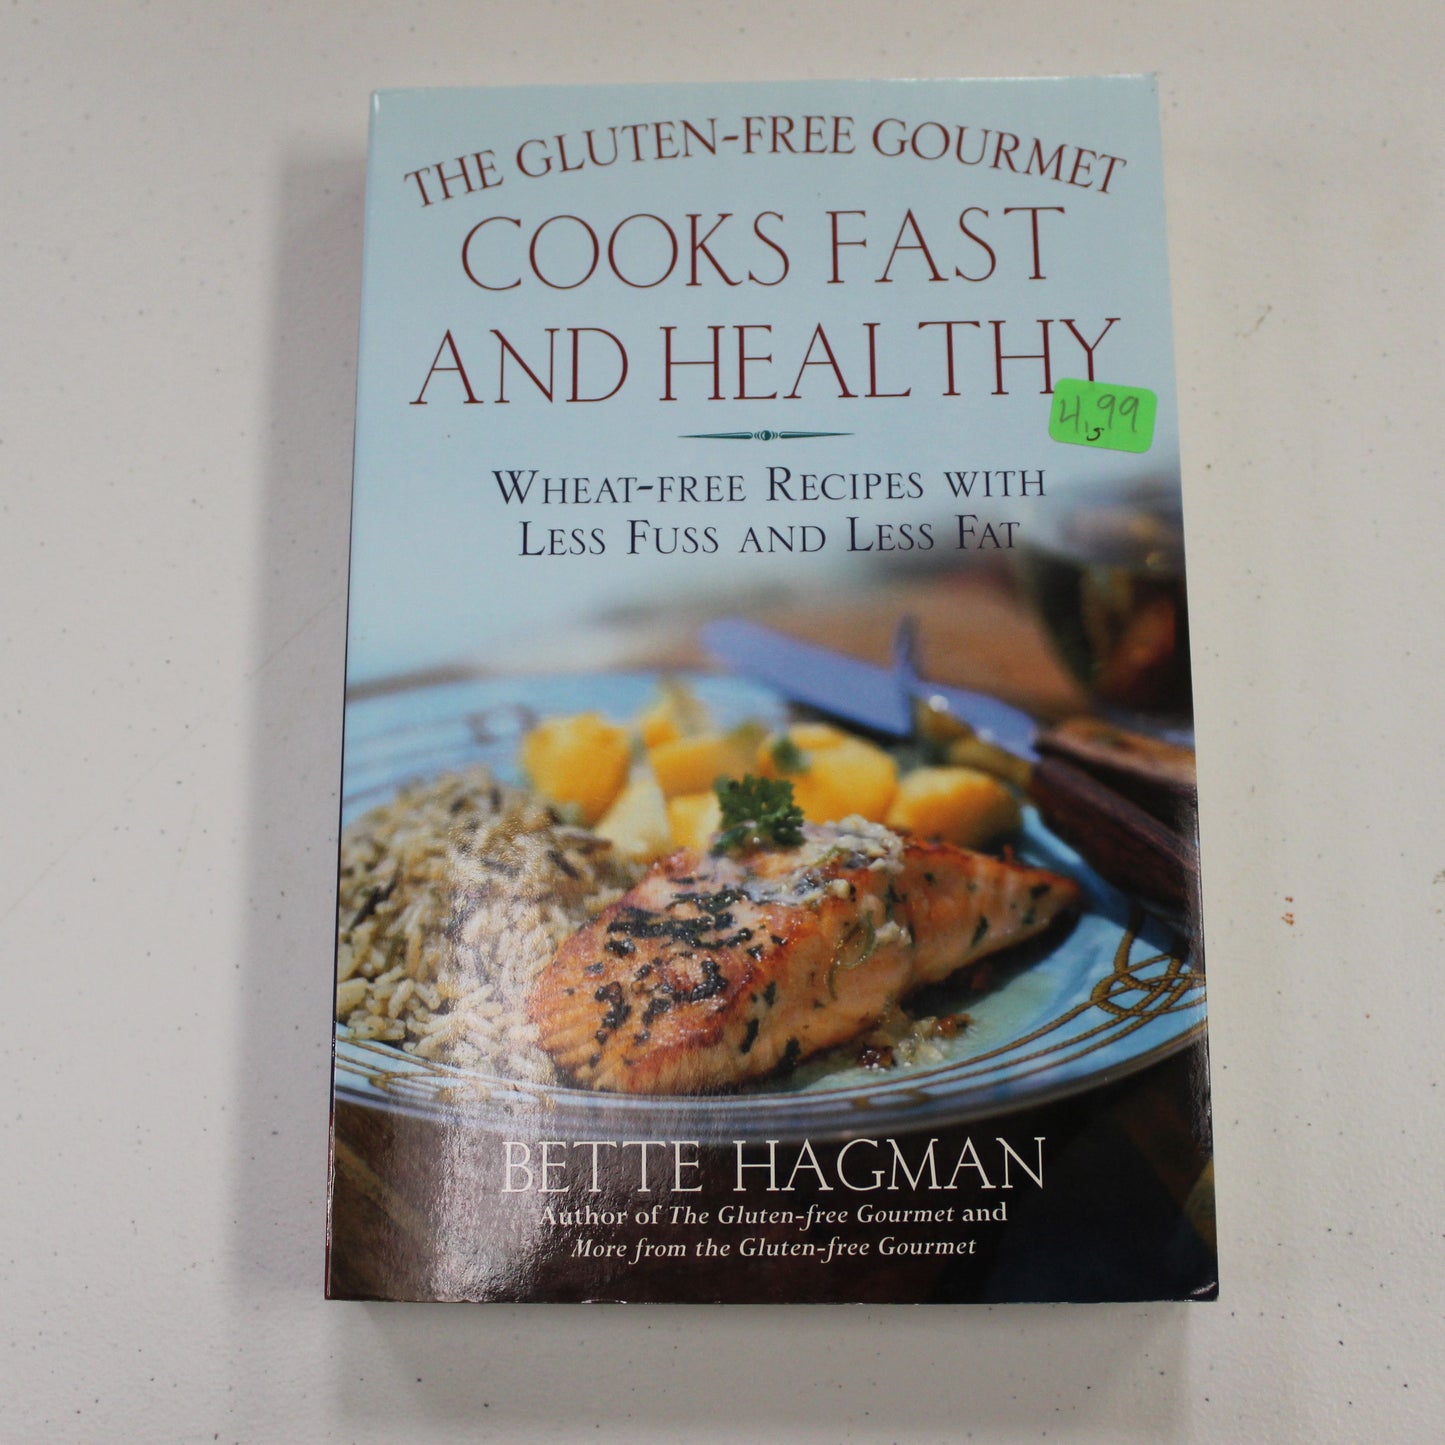 THE GLUTEN-FREE GOURMET COOKS FAST AND HEALTHY